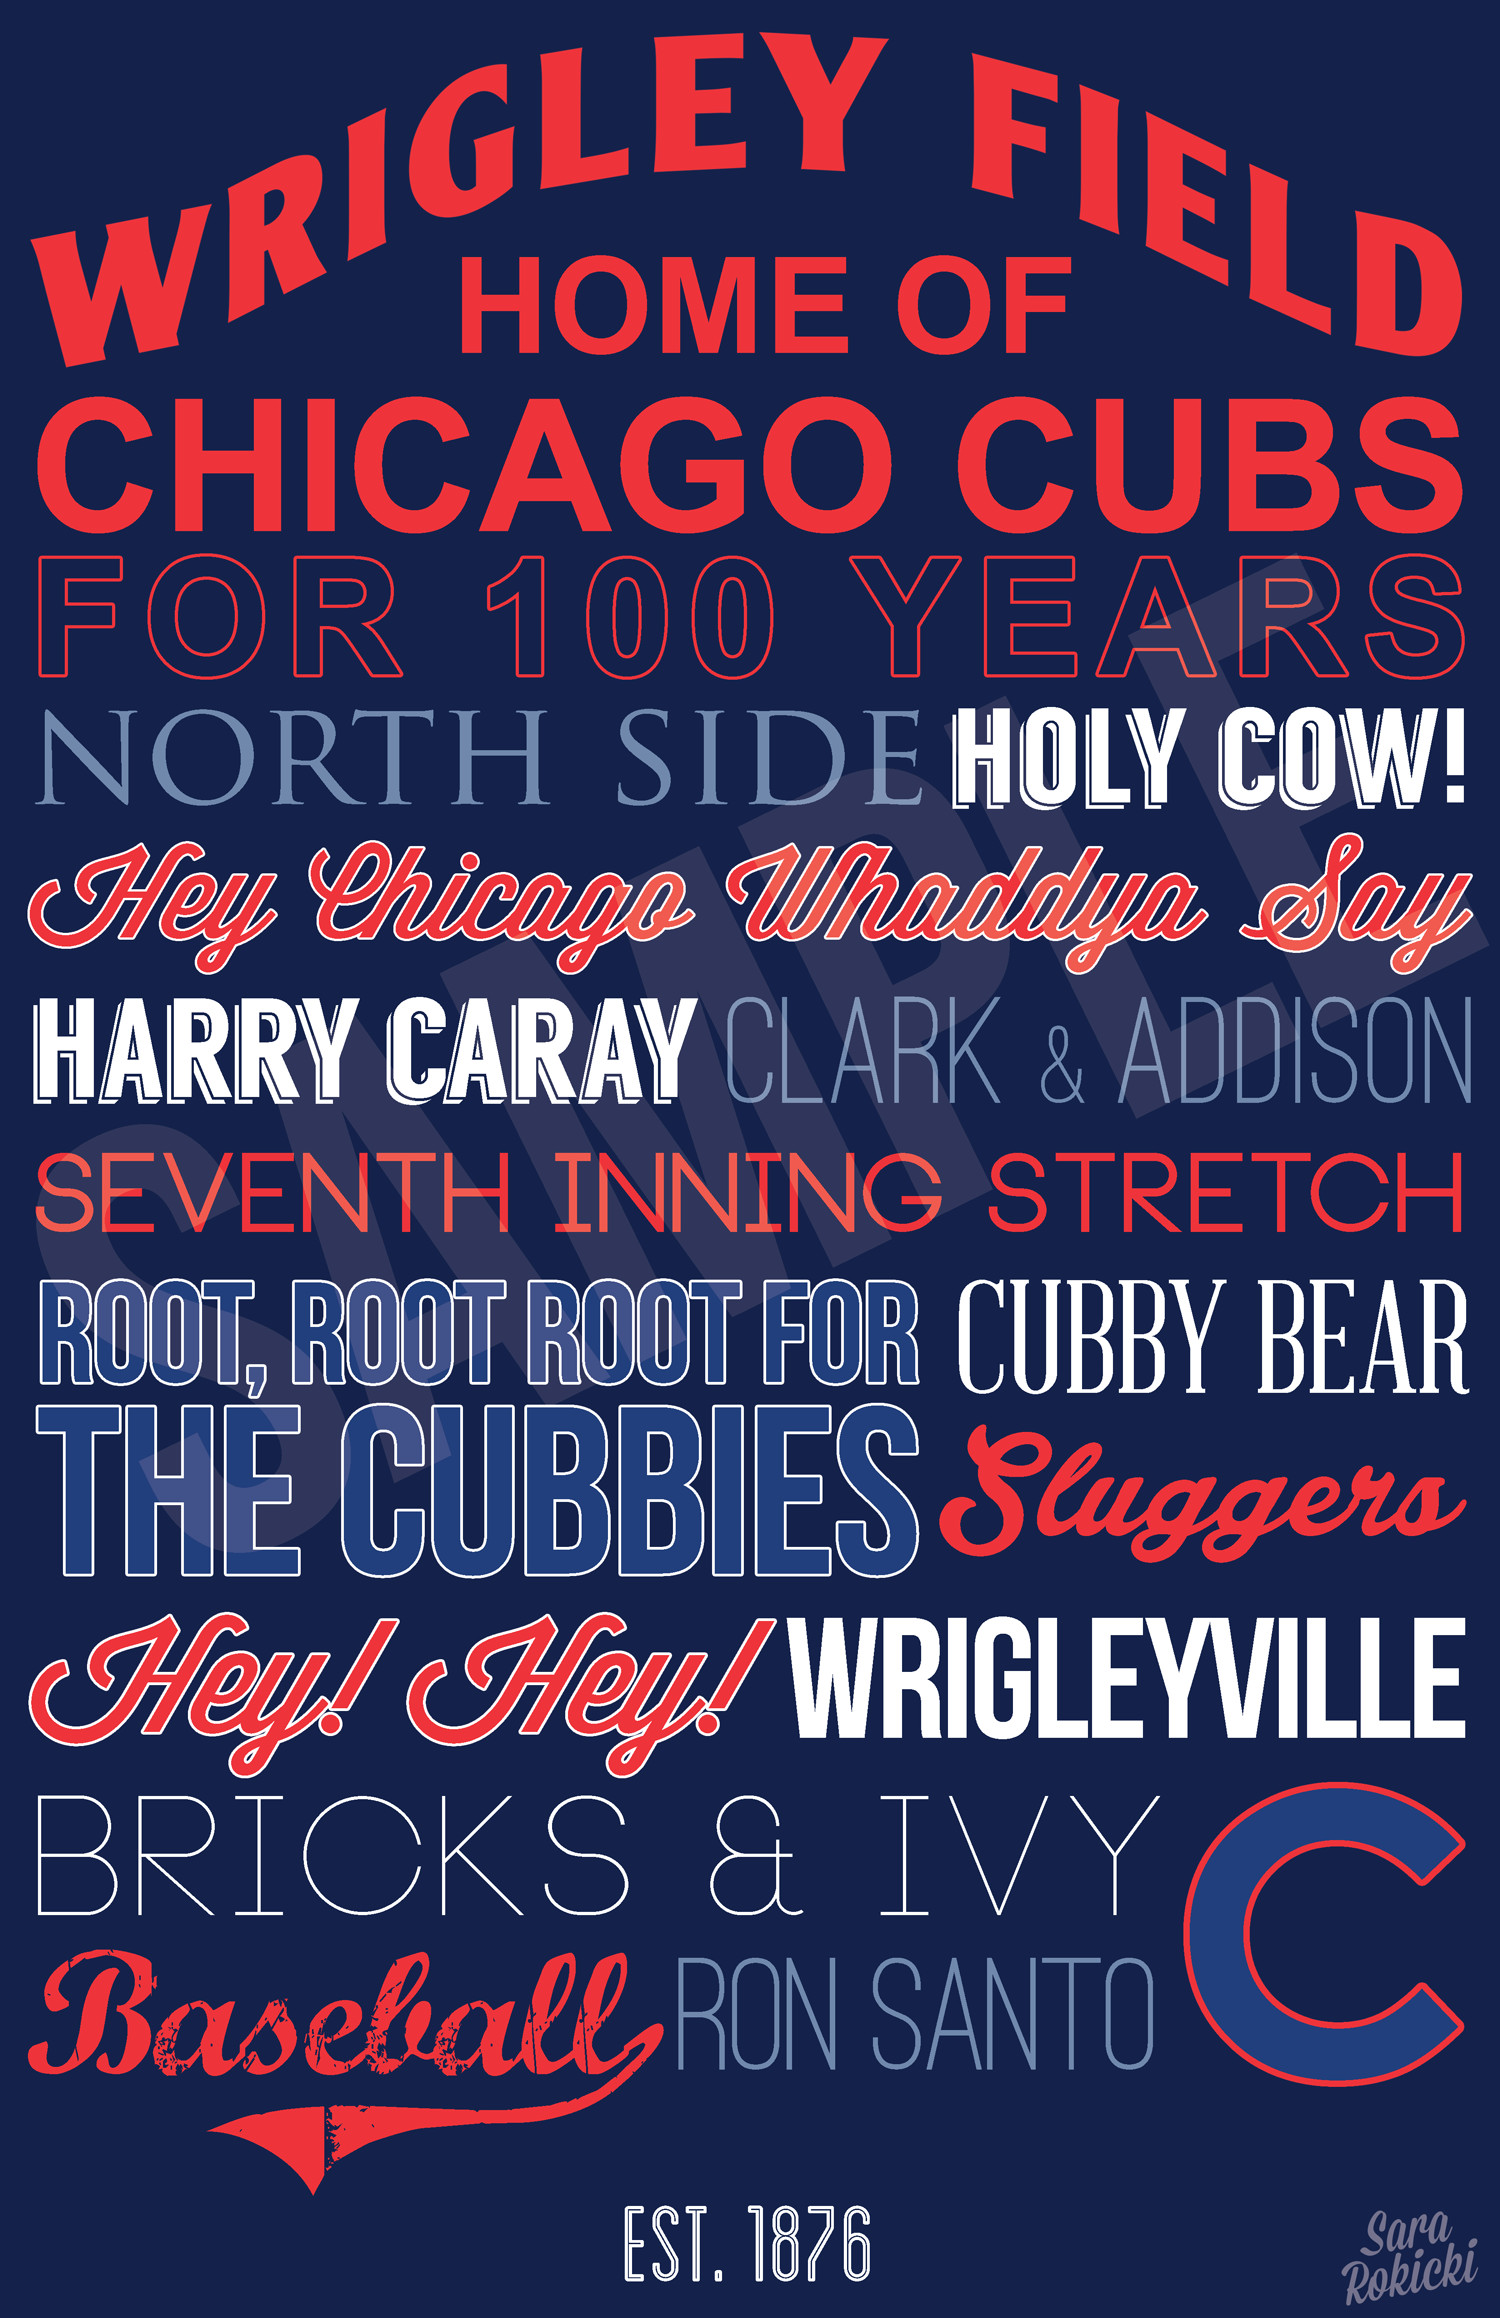 Chicago Cubs Art. #typography #canvas #graphicdesign #gift etsy